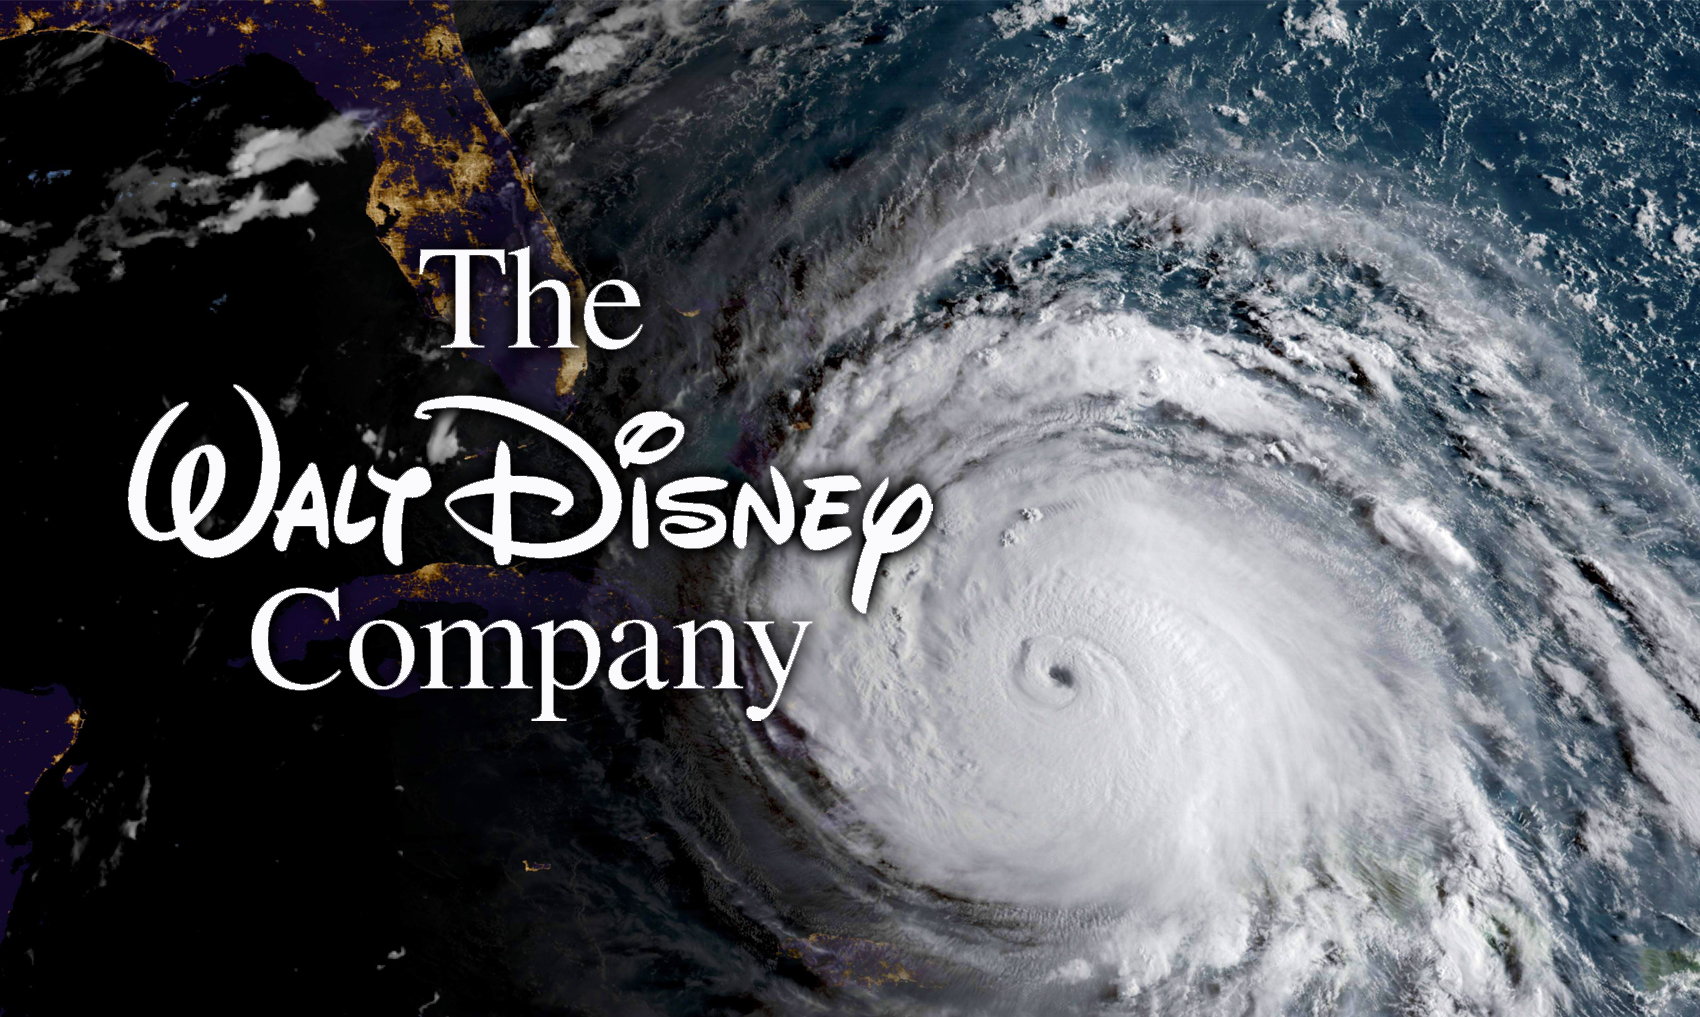 The Walt Disney Company Donates $2.5 Million in Humanitarian Aid to Support Communities Impacted by Hurricane Irma